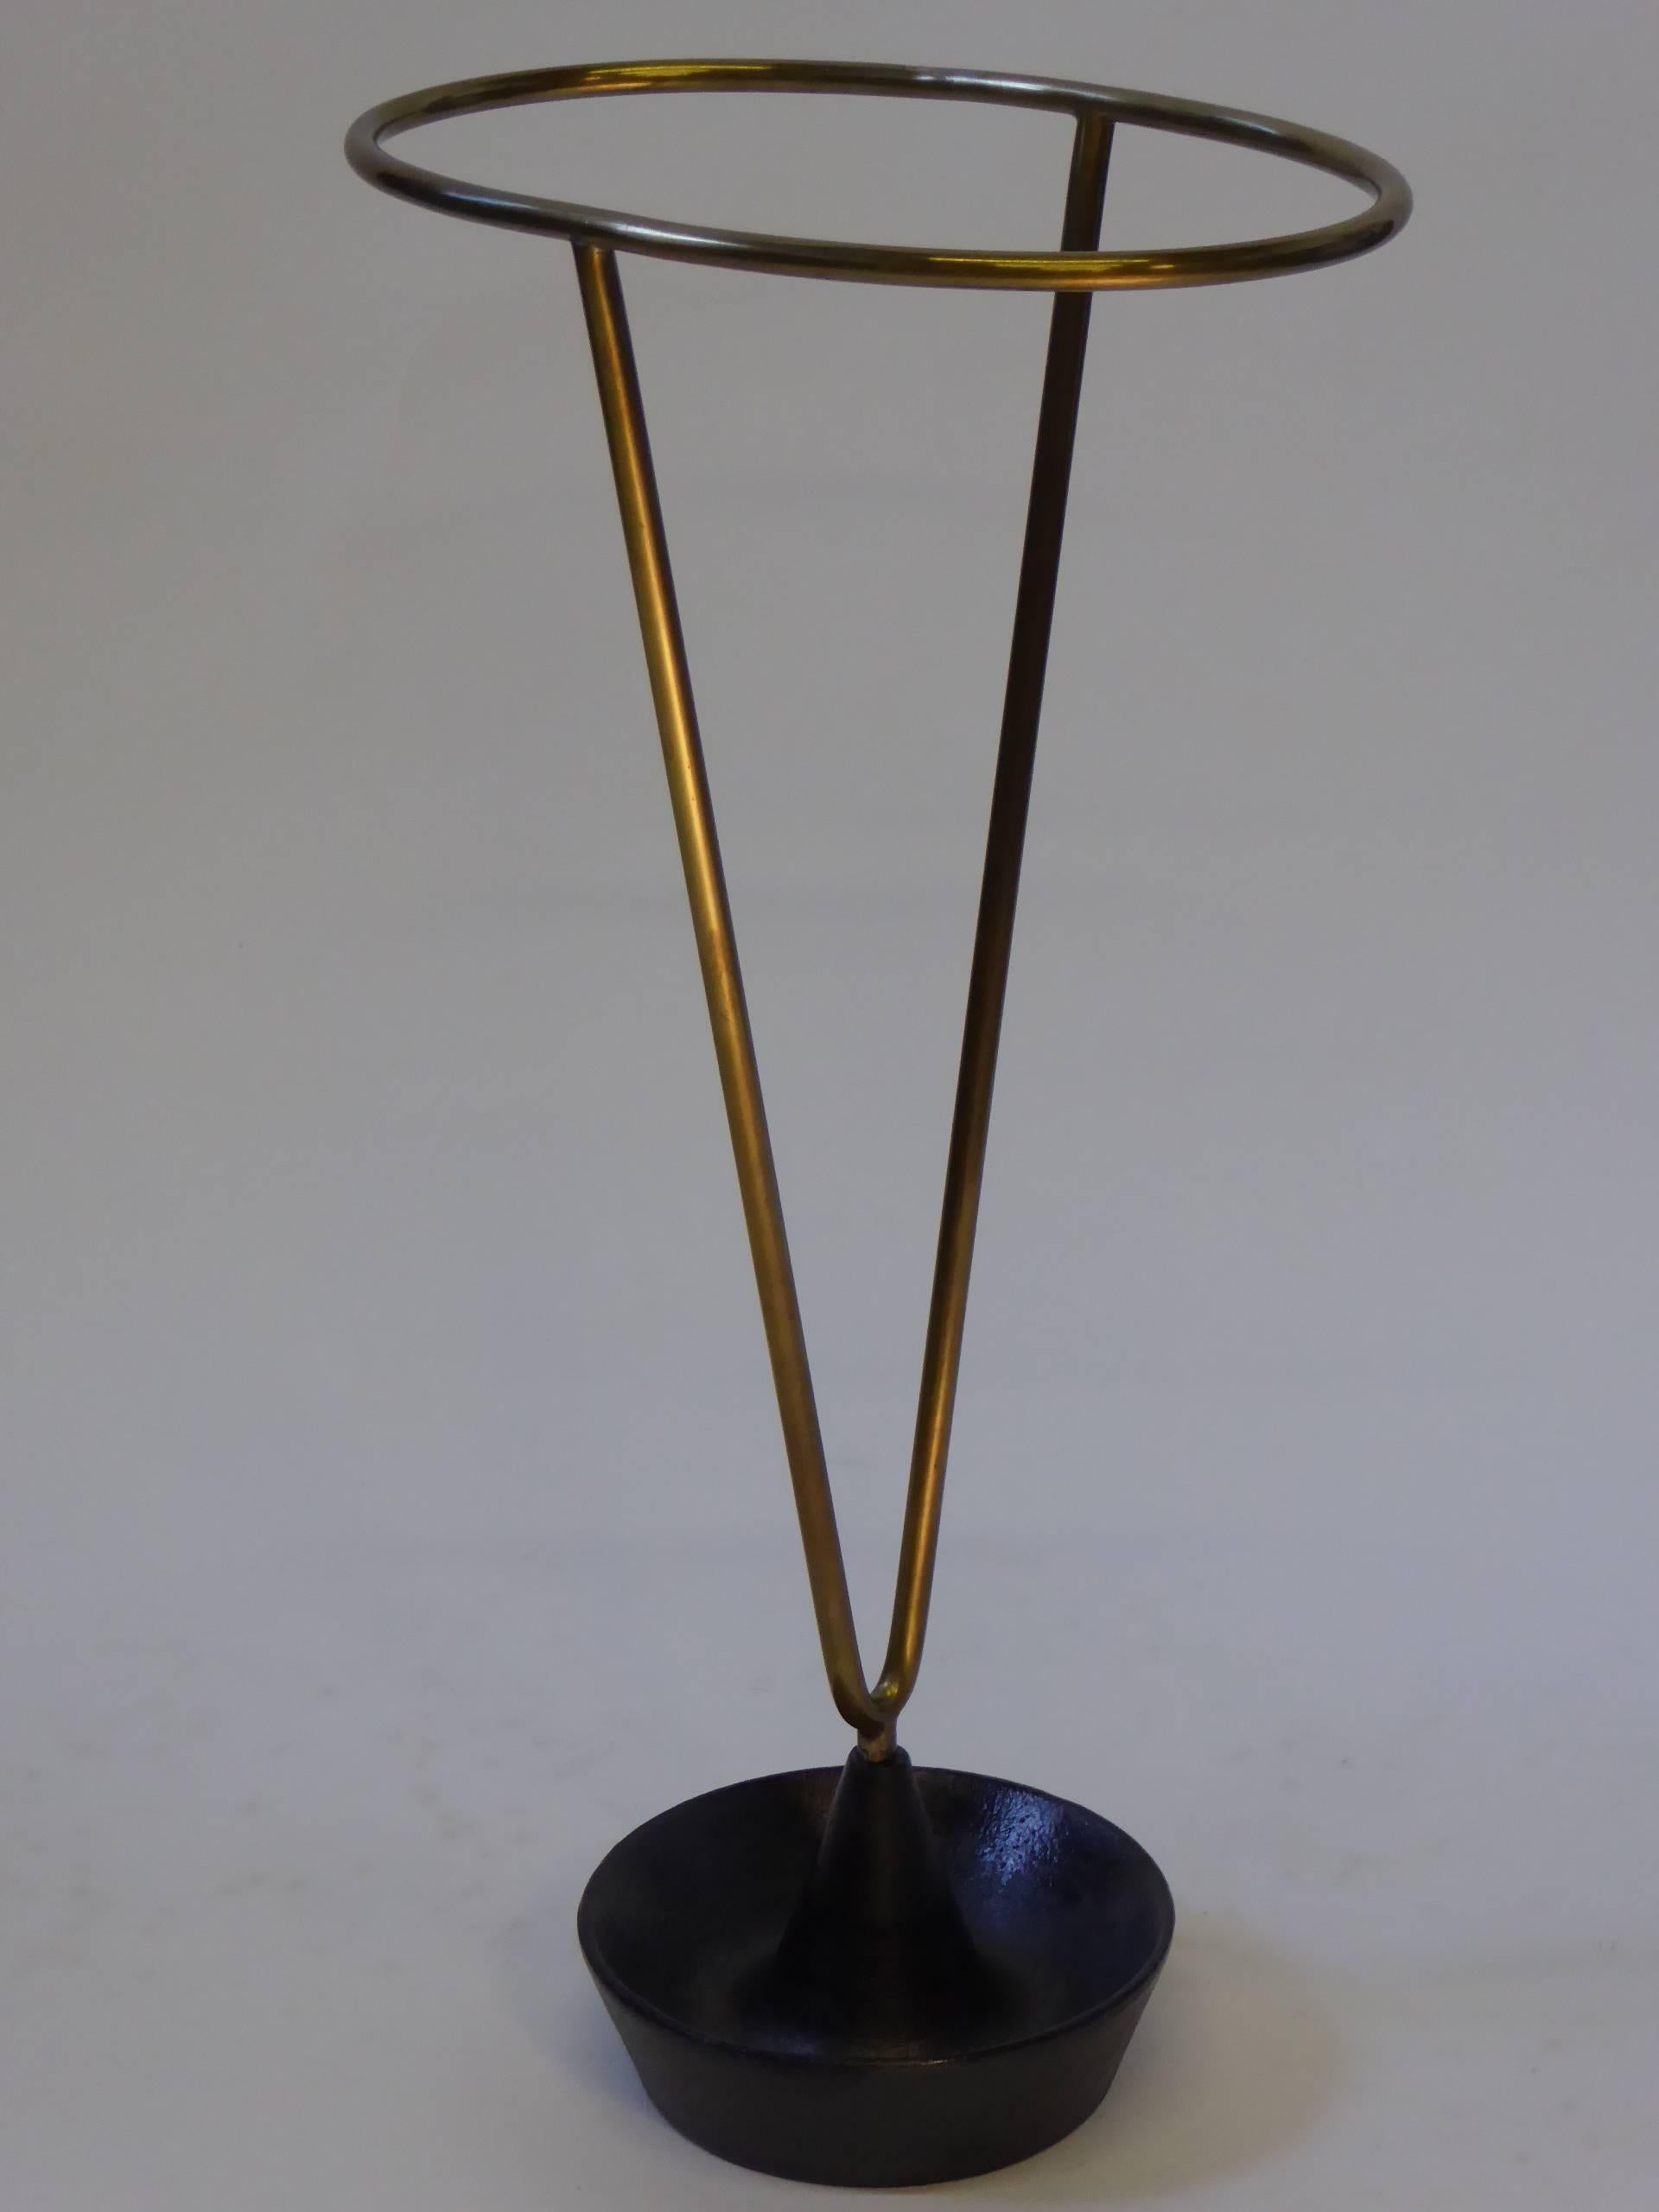 ....SOLD...Early 1950s Carl Auböck brass and iron umbrella stand. Post war styling is evident here with its sculpted iron bowl base and uprising solid brass body. Signed in the brass Aubock and made in Austria. Excellent condition.
Measurements: